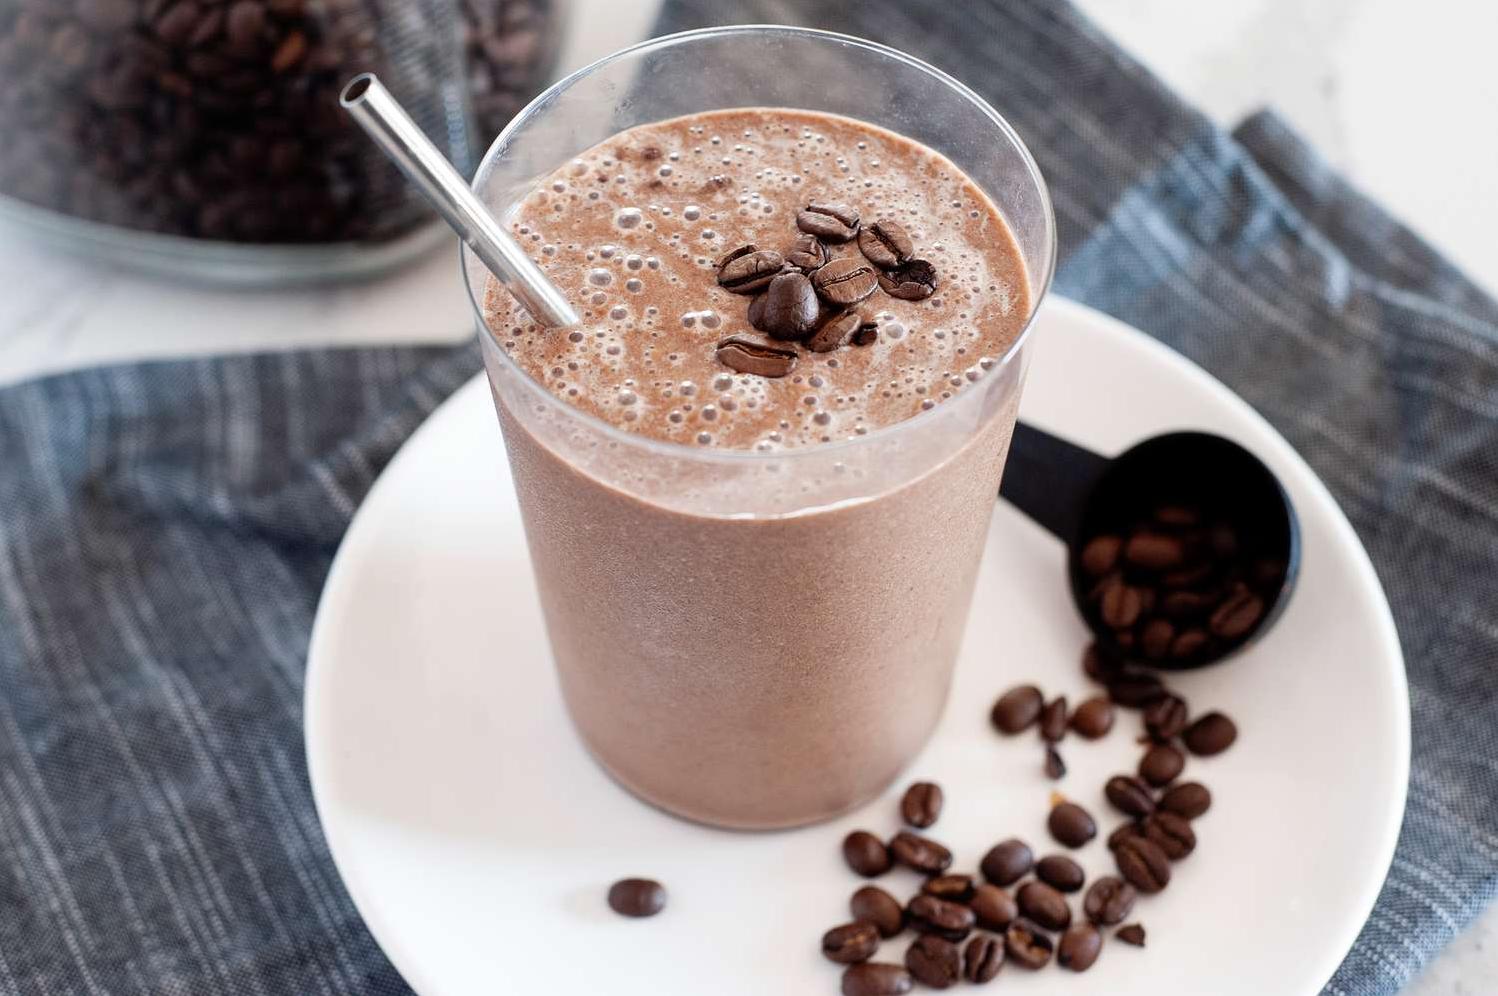  Start your day off right with our refreshing Coffee Smoothie.